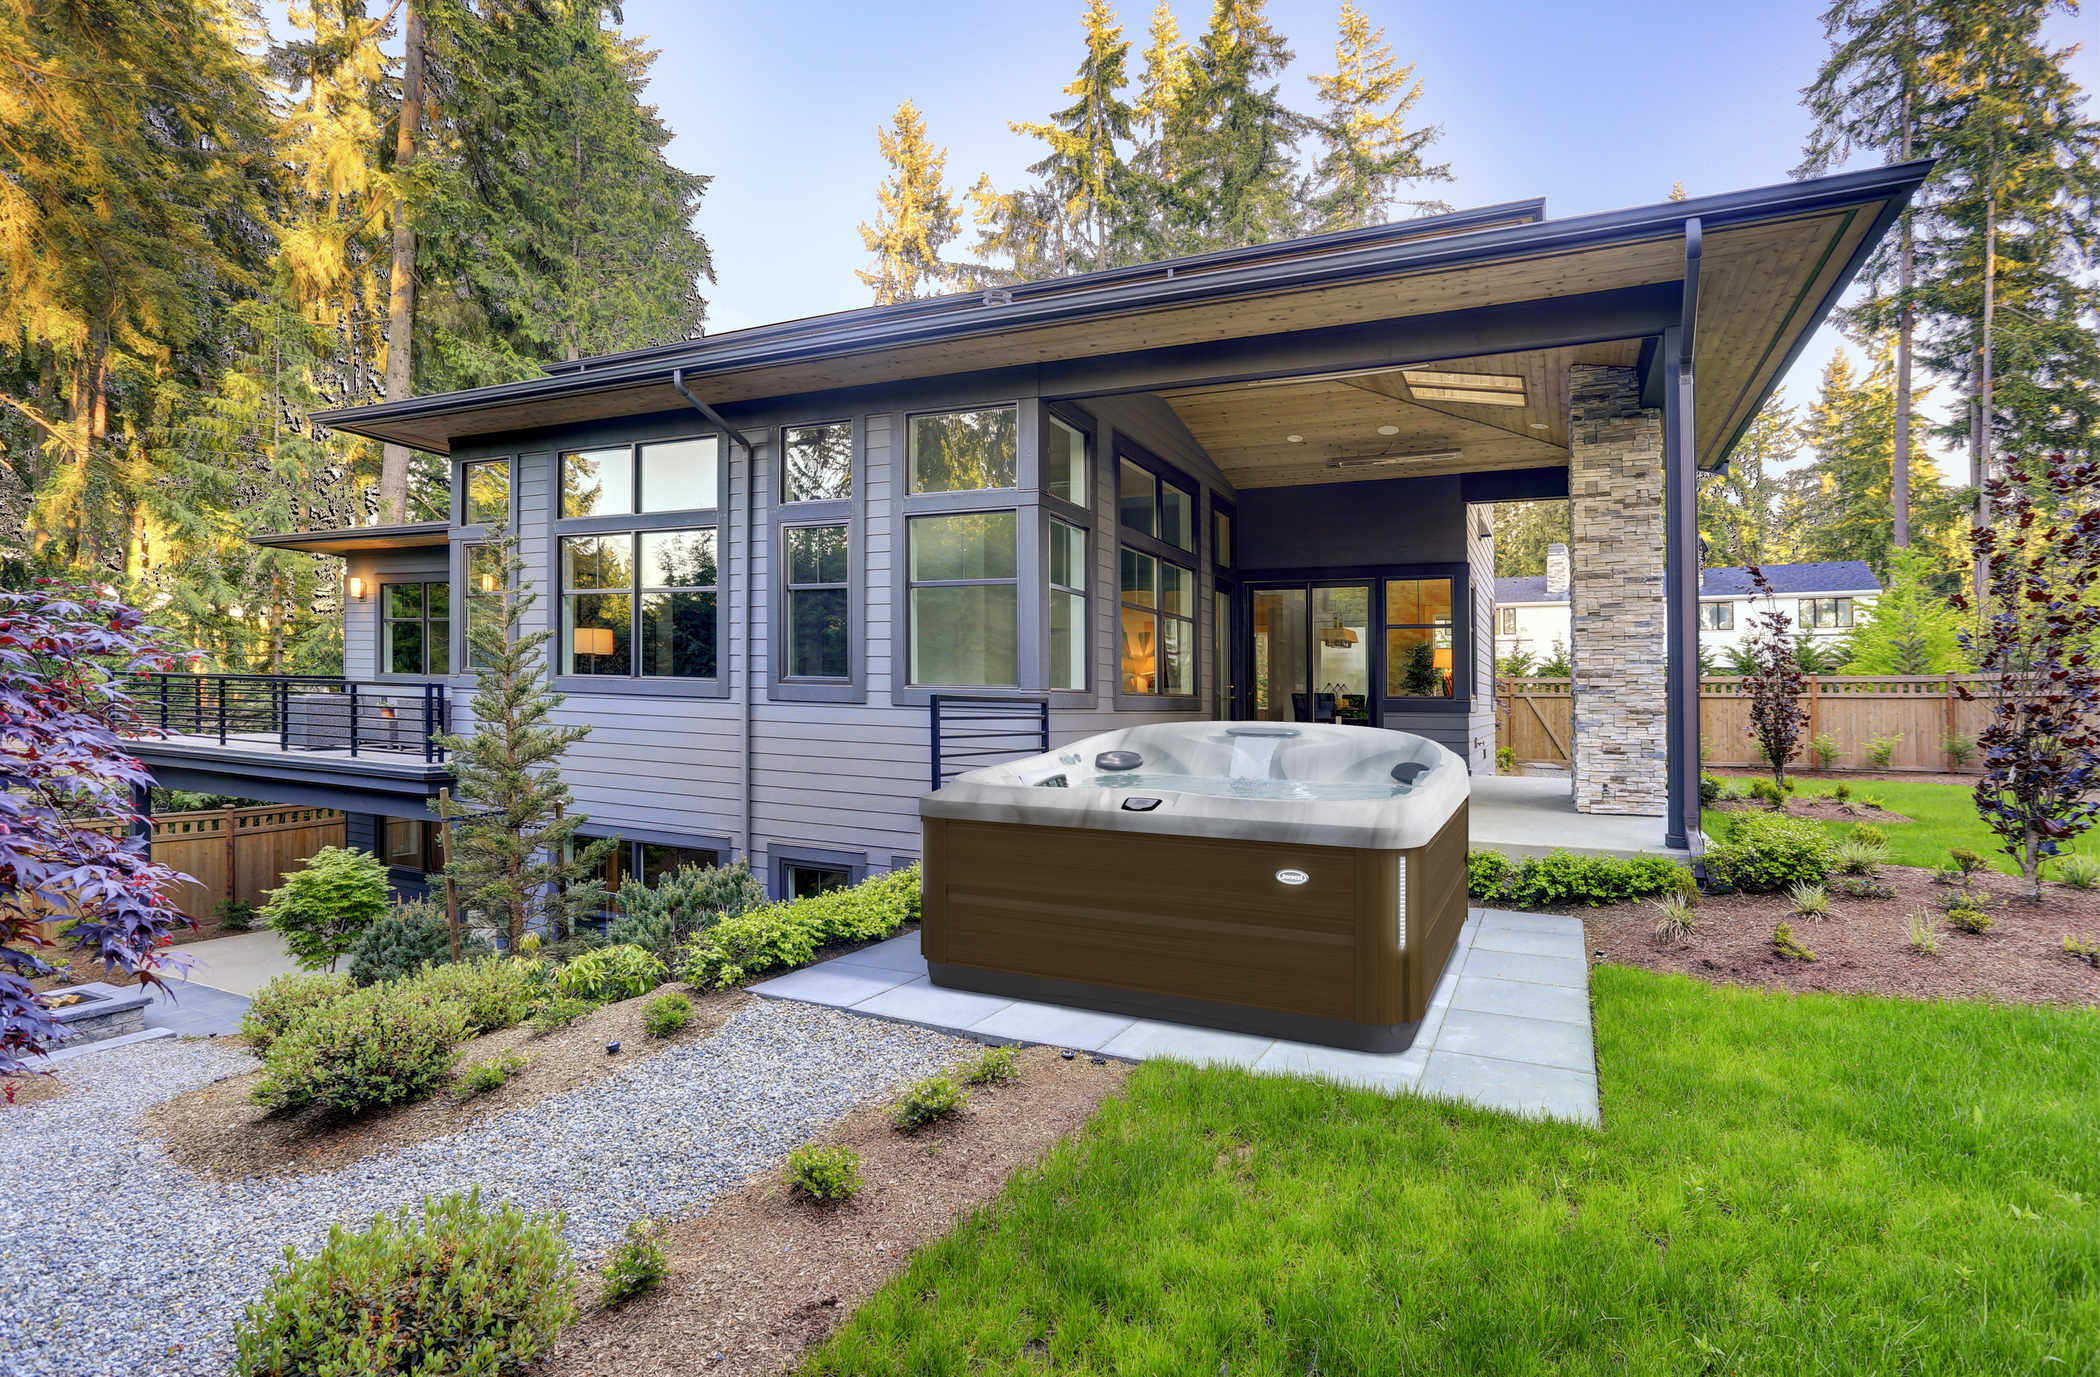 Backyard Hot Tub Privacy: Do You Really Need It? This Will Help You Decide!